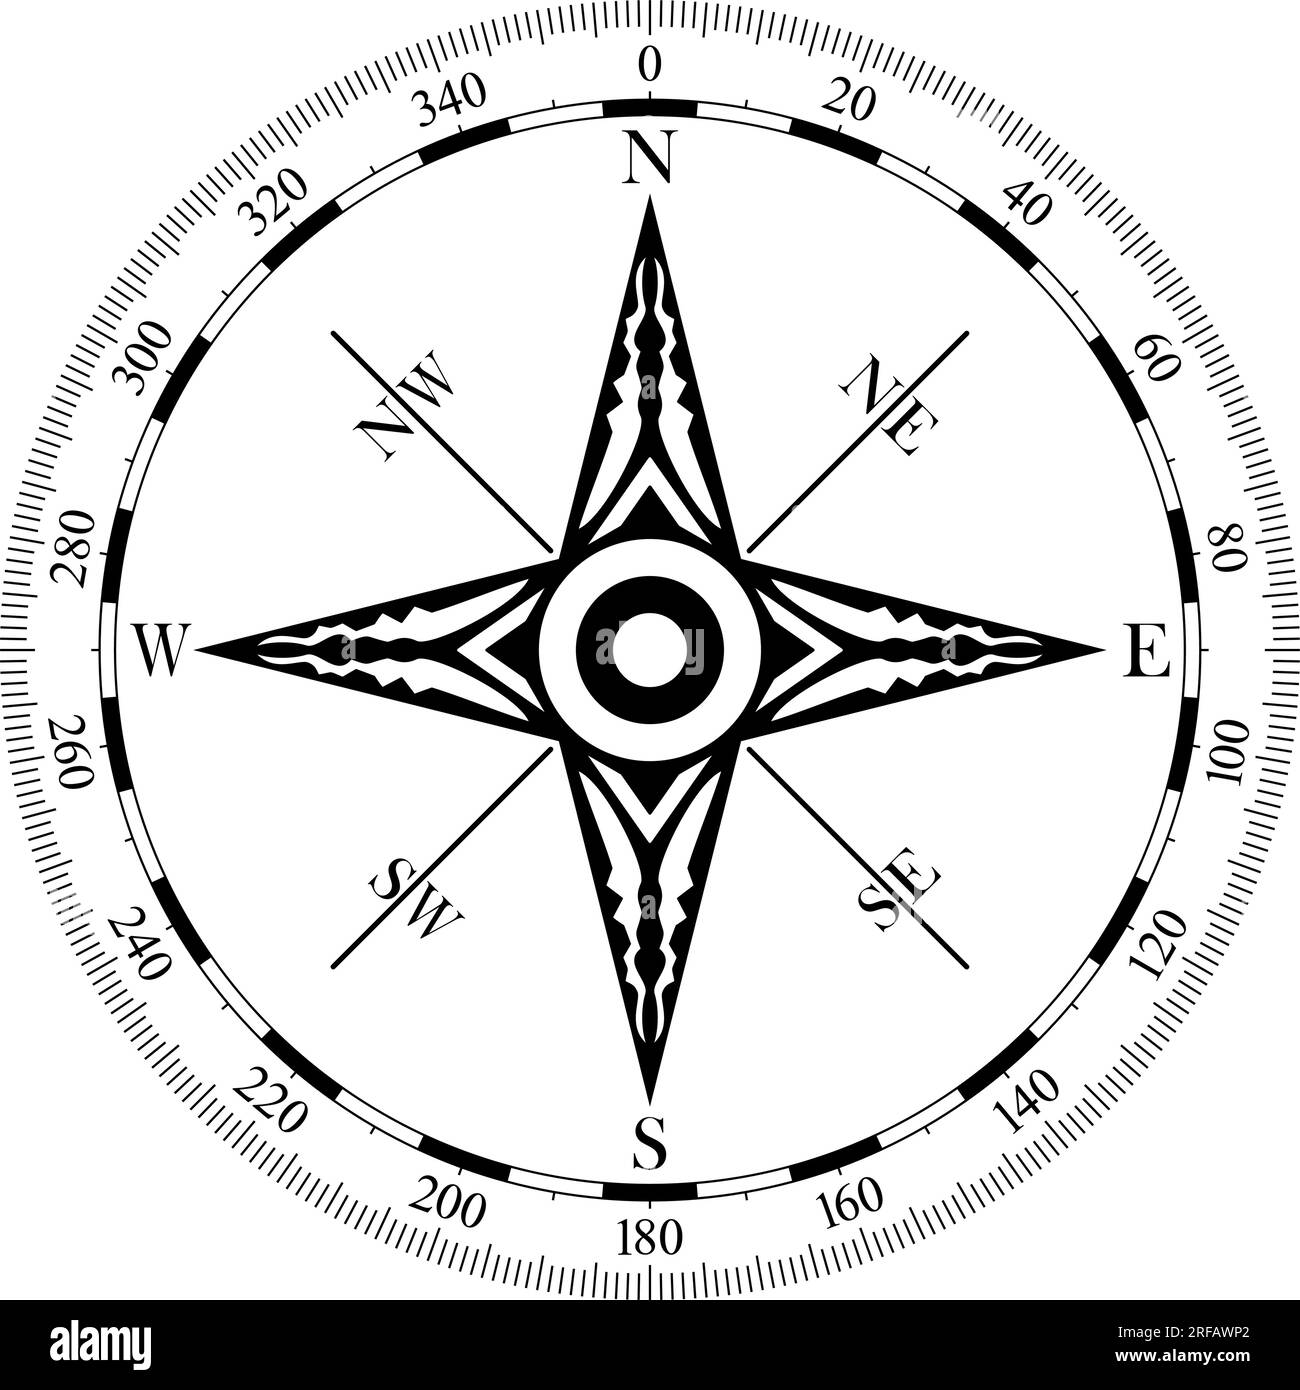 Compass rose vector with Ornament and Scale. Eight directions. Marine, nautical or trekking navigation symbol. Or useable in a geographic map. Stock Vector